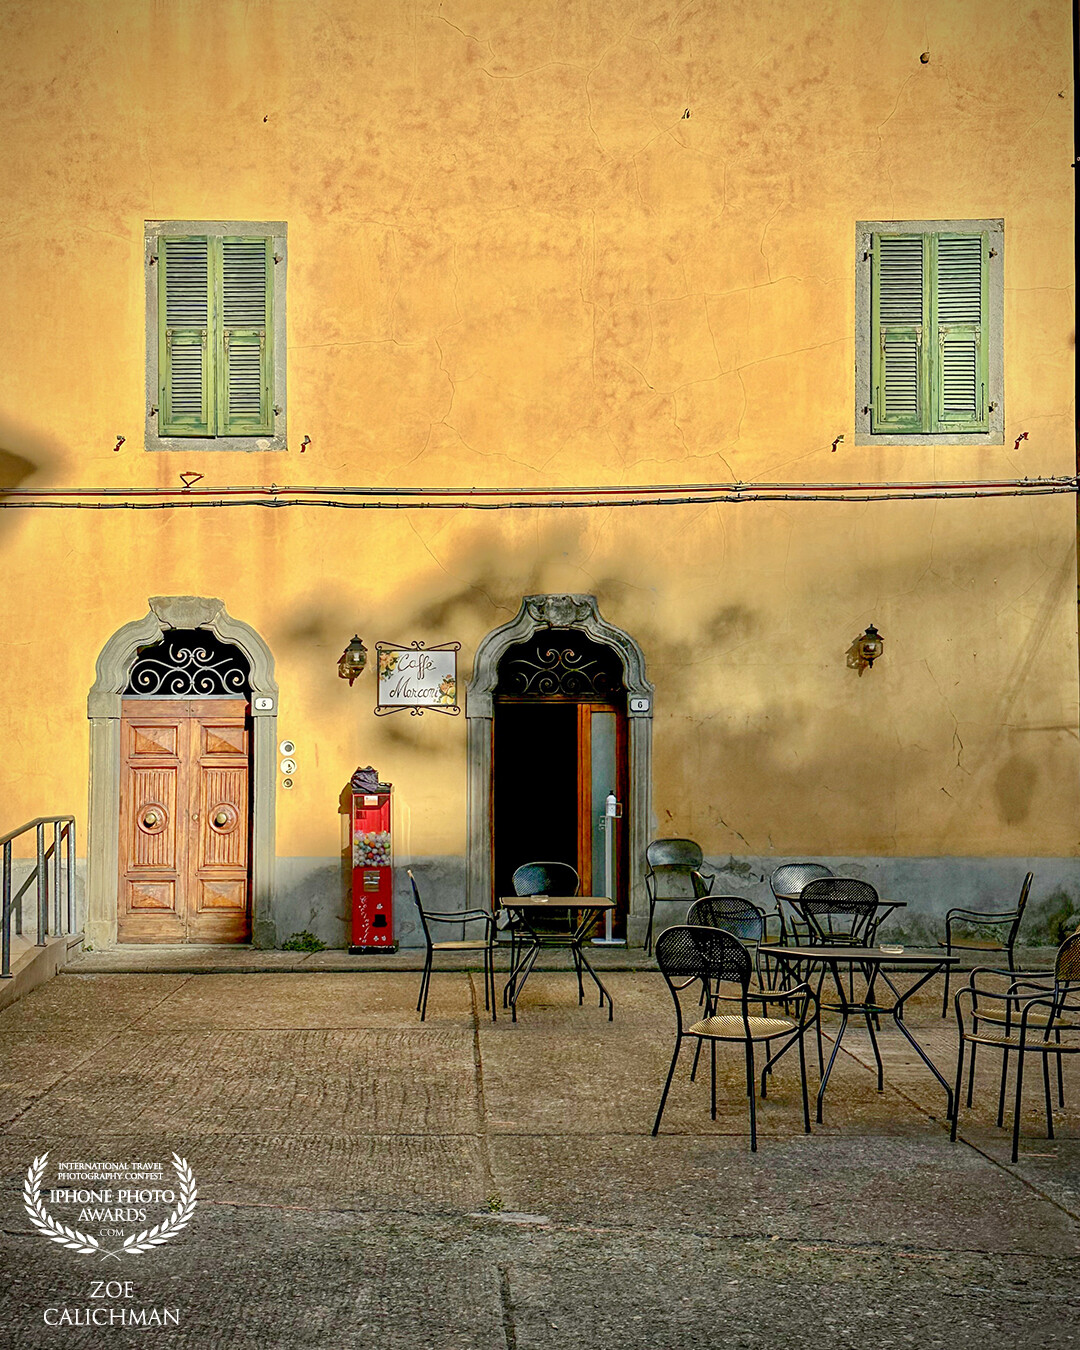 A lazy afternoon stroll in one of the small Tuscany villages. Empty outdoor cafe with casting sun depicts a perfect charming Italy.